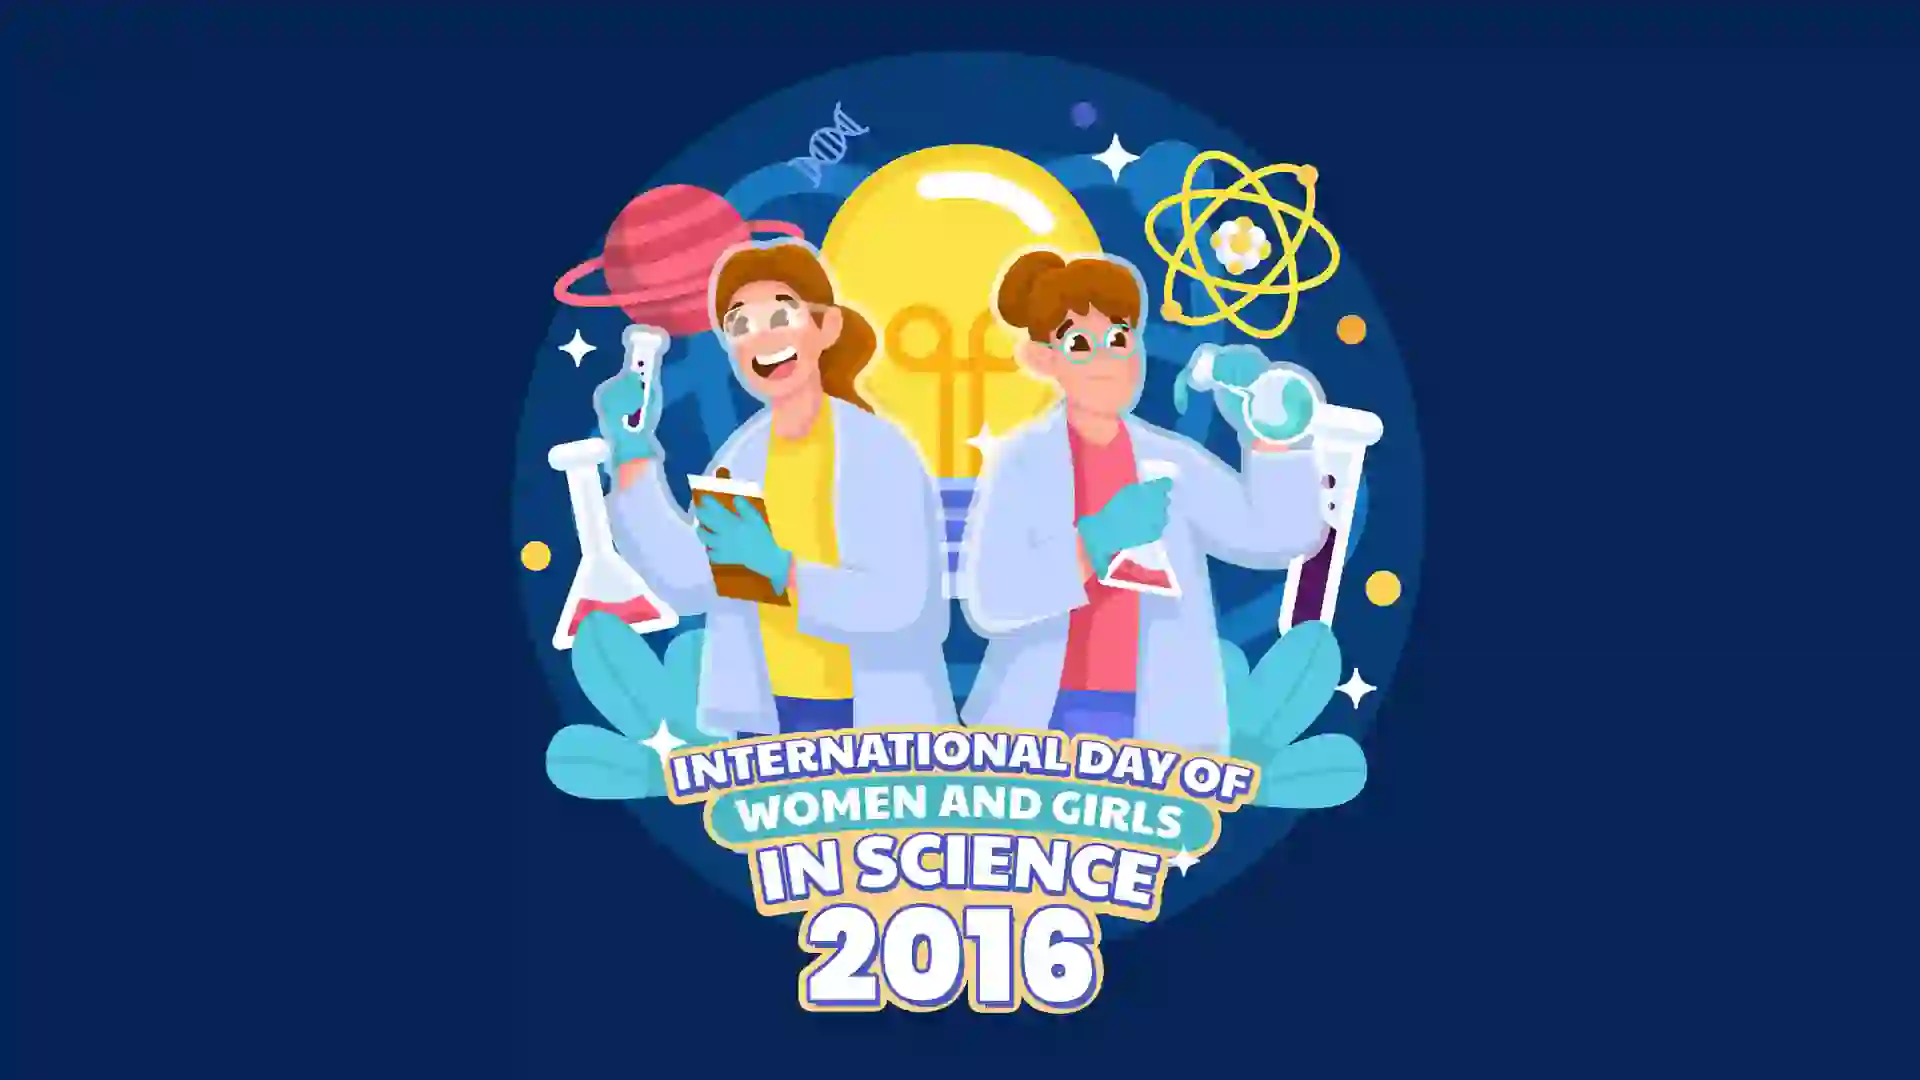 International Day of Women and Girls in Science This Post Design By The Revolution Deshbhakt Hindustani